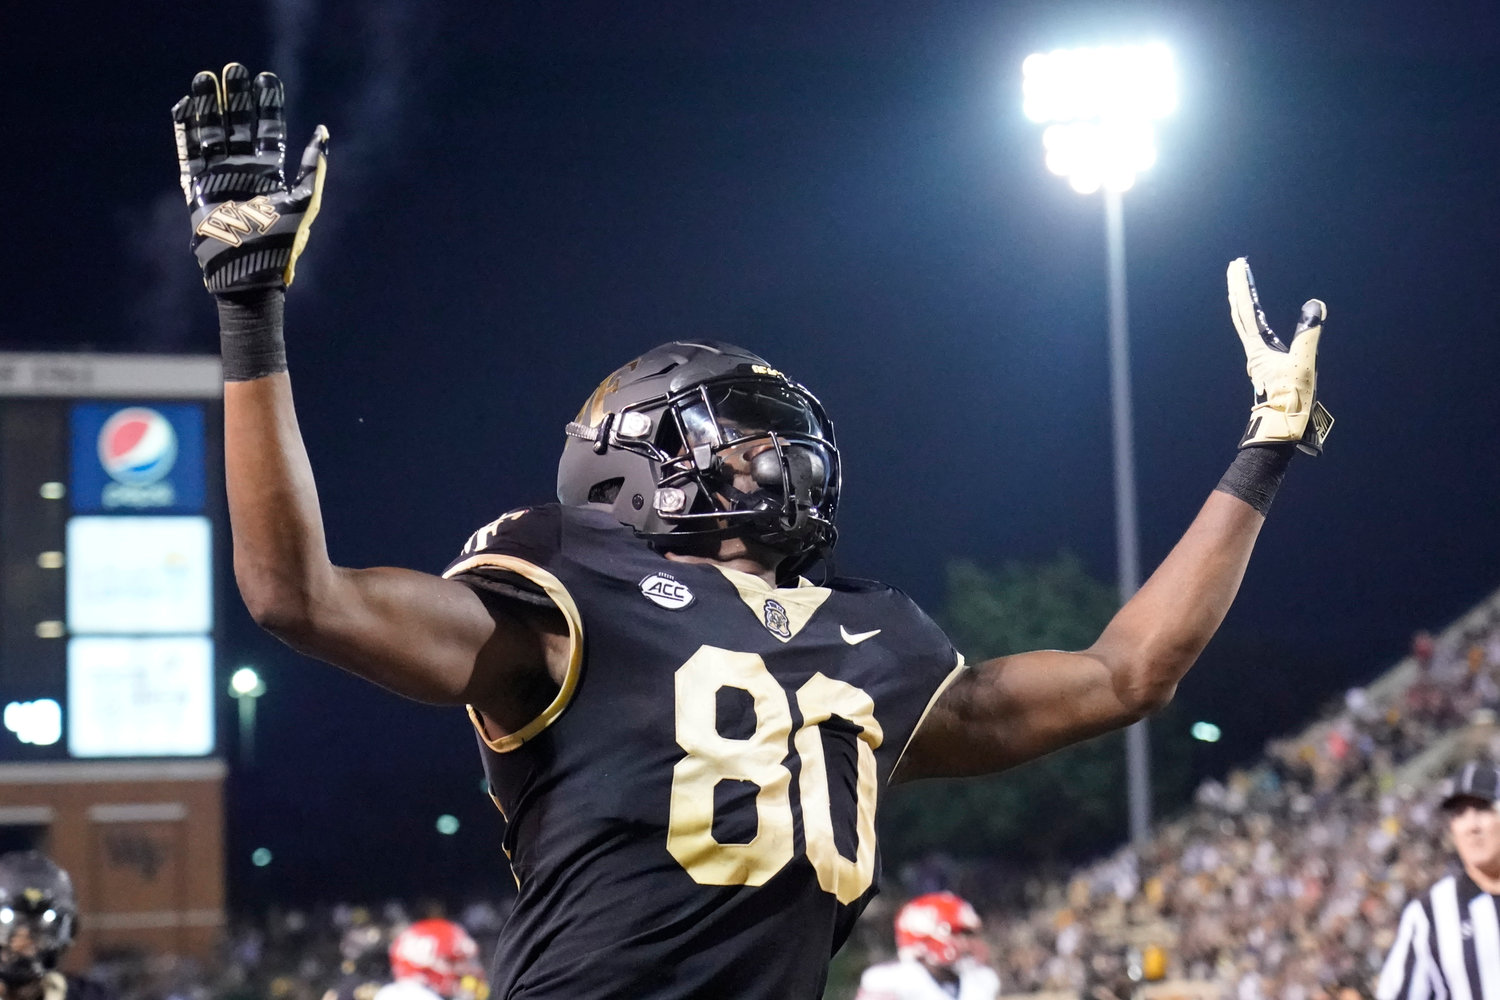 Wake Forest wide receiver Jahmal Banks (80) celebrates after catching a touchdown pass against Liberty during the second half of an NCAA college football game in Winston-Salem, N.C., Saturday, Sept. 17, 2022. (AP Photo/Chuck Burton)